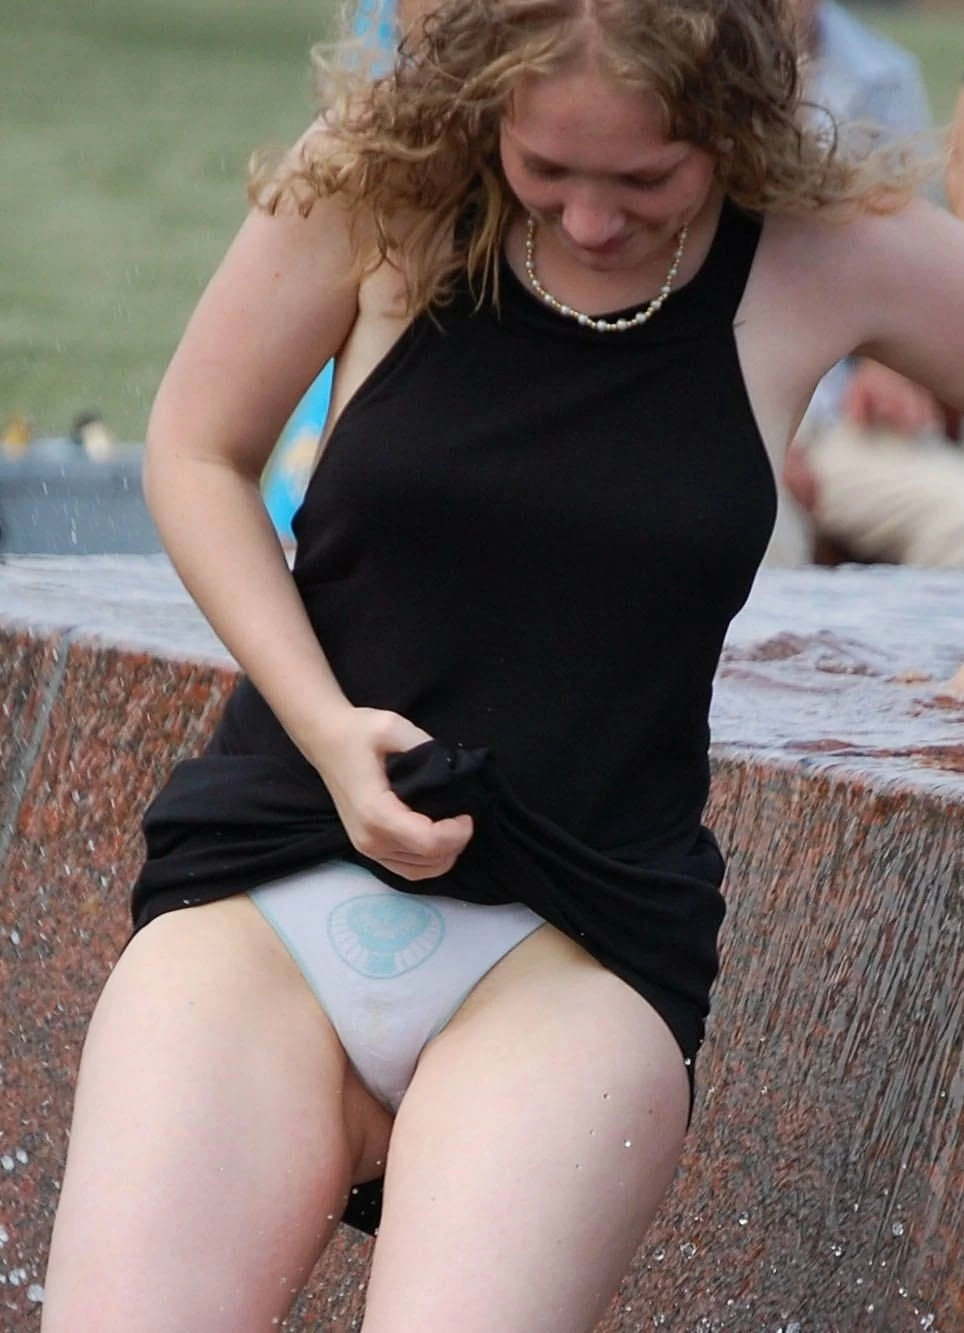 Todays free HQ Picture titled Young blonde teen outdoor flashing underwear upskirt 